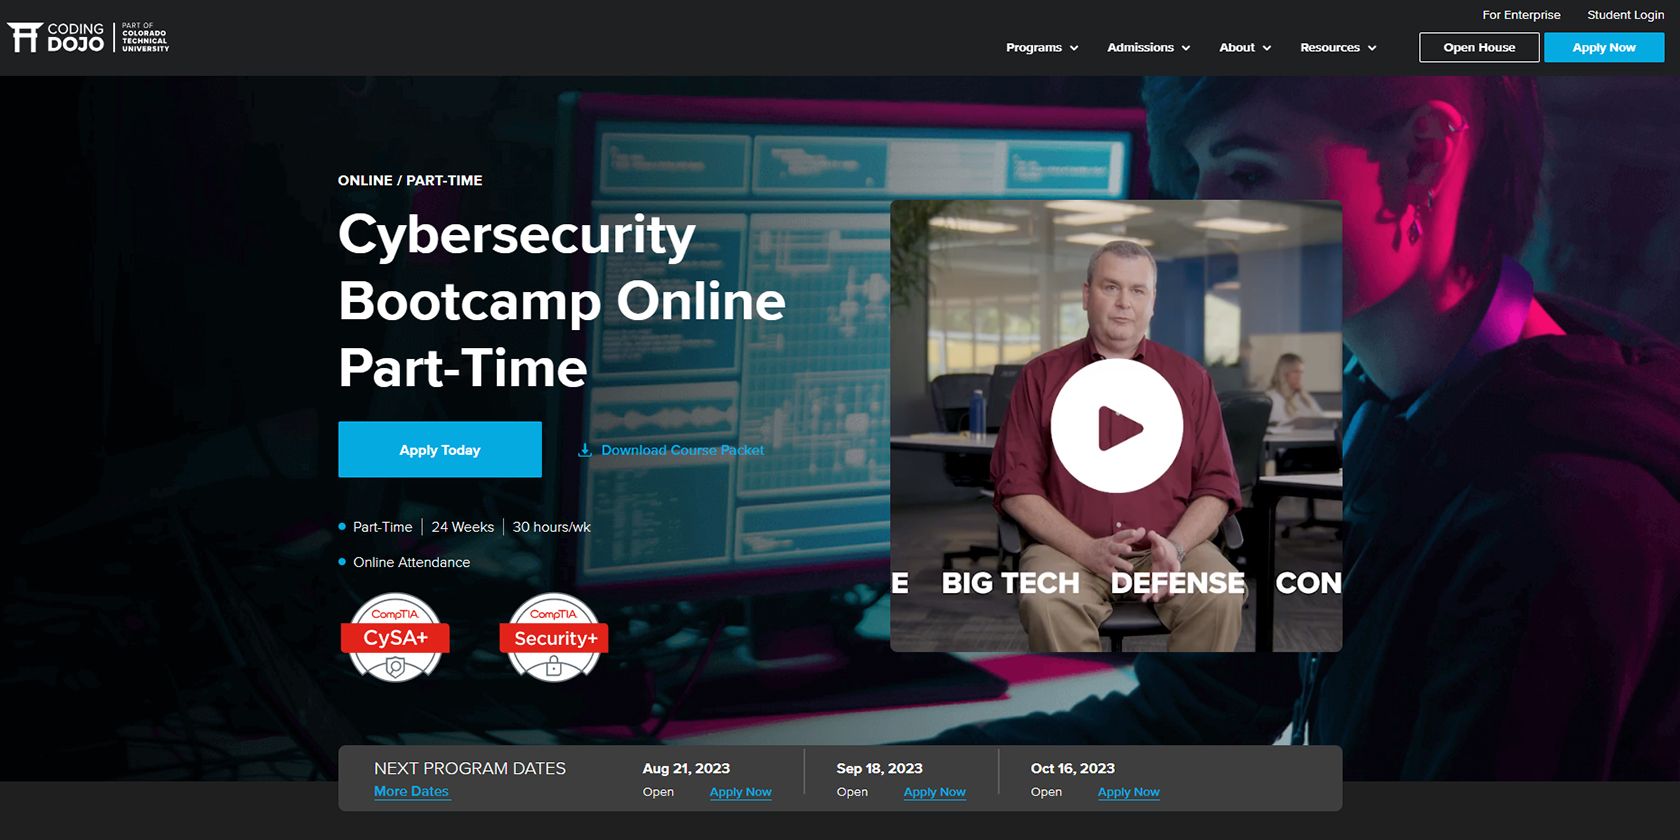 The Coding Dojo Cybersecurity Bootcamp